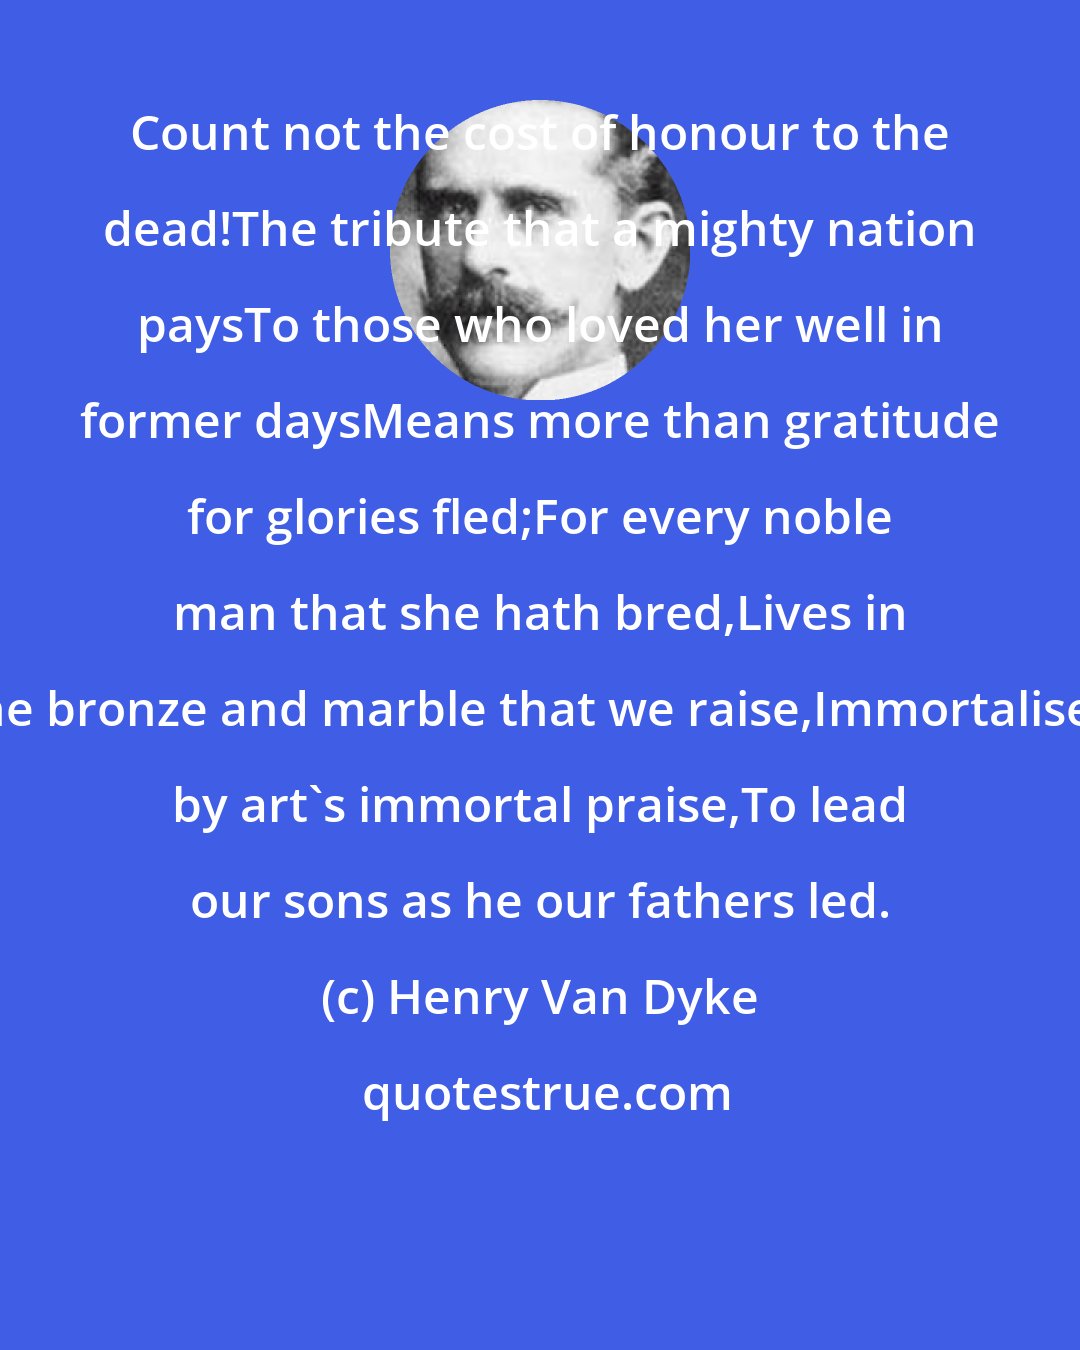 Henry Van Dyke: Count not the cost of honour to the dead!The tribute that a mighty nation paysTo those who loved her well in former daysMeans more than gratitude for glories fled;For every noble man that she hath bred,Lives in the bronze and marble that we raise,Immortalised by art's immortal praise,To lead our sons as he our fathers led.